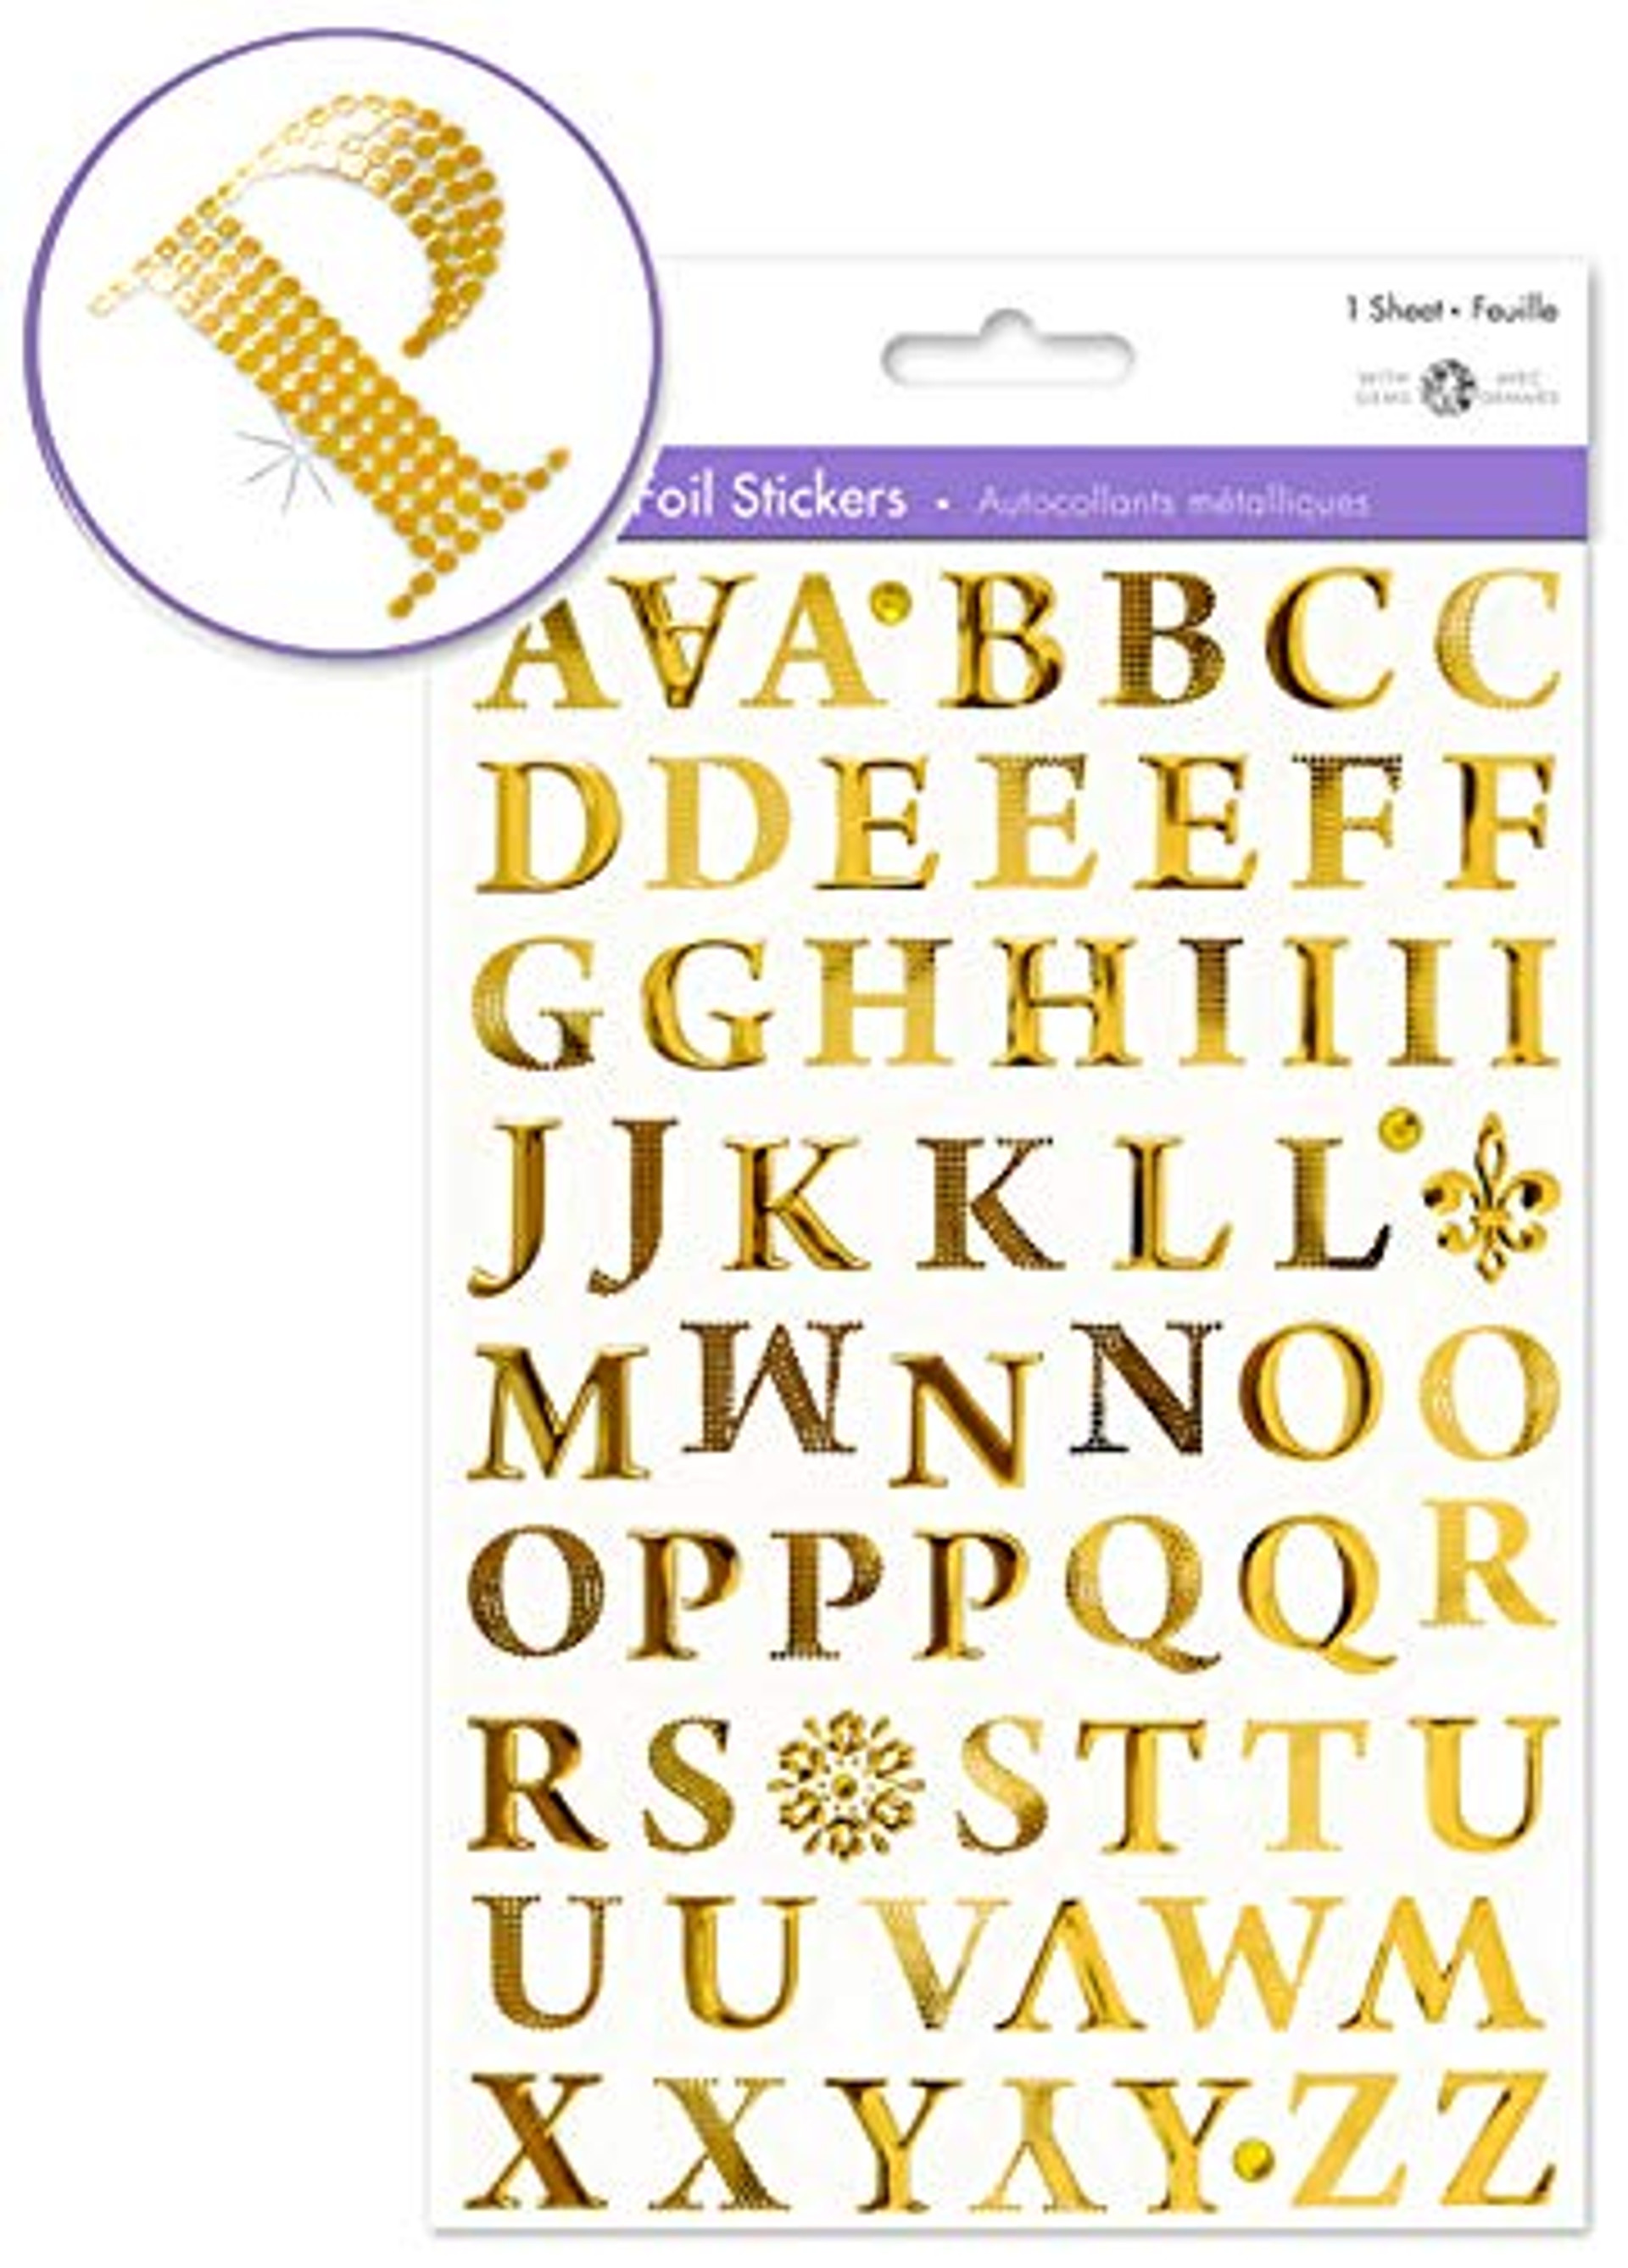 gold-letter-stickers-gold-alphabet-stickers-gold-sticker-letters-adhesive-letters-stickers